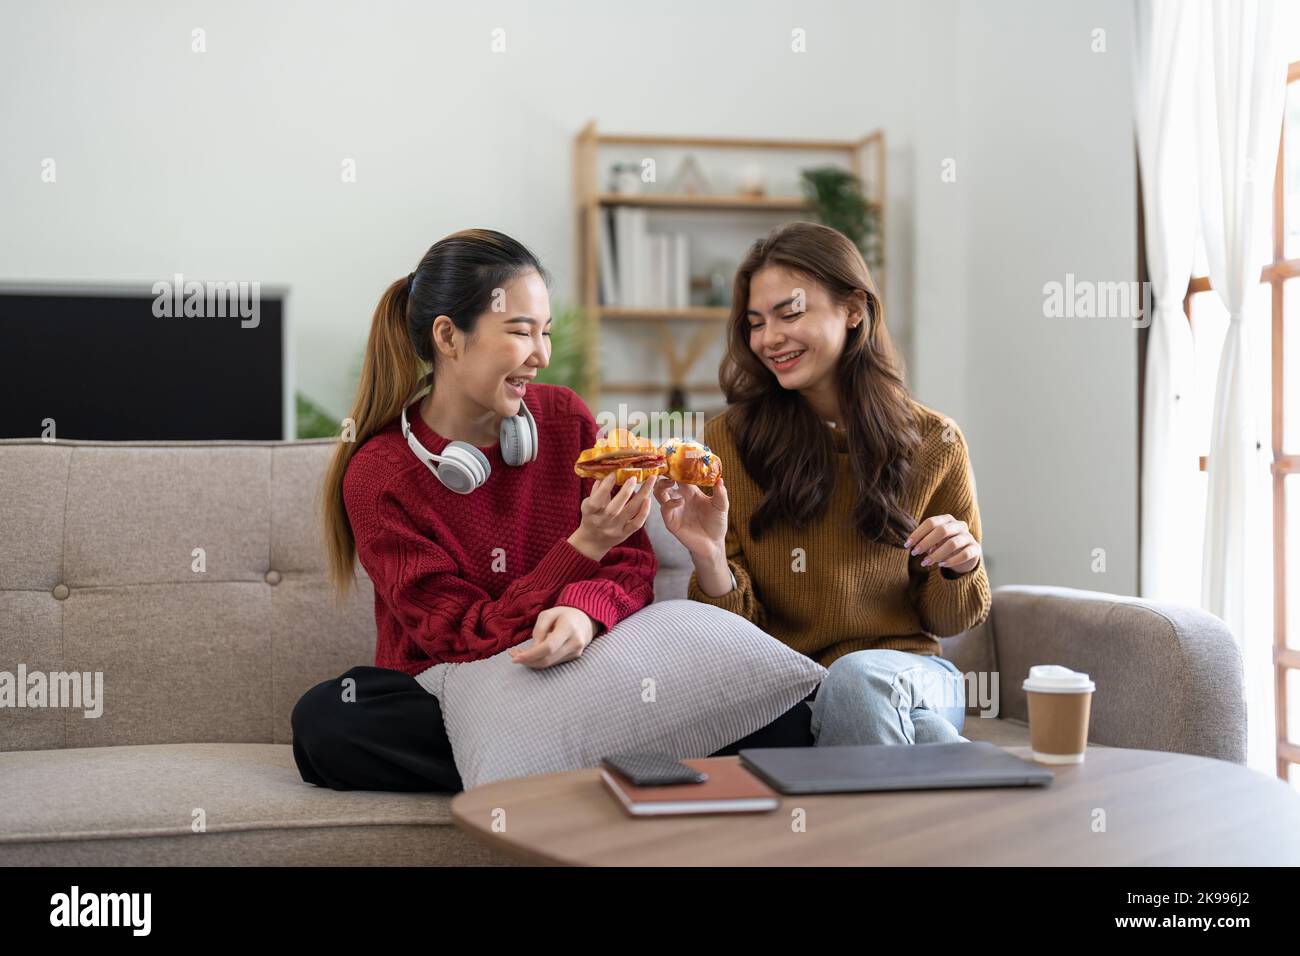 Two friends enjoying eating croissant sitting on a couch in the living room at home Stock Photo